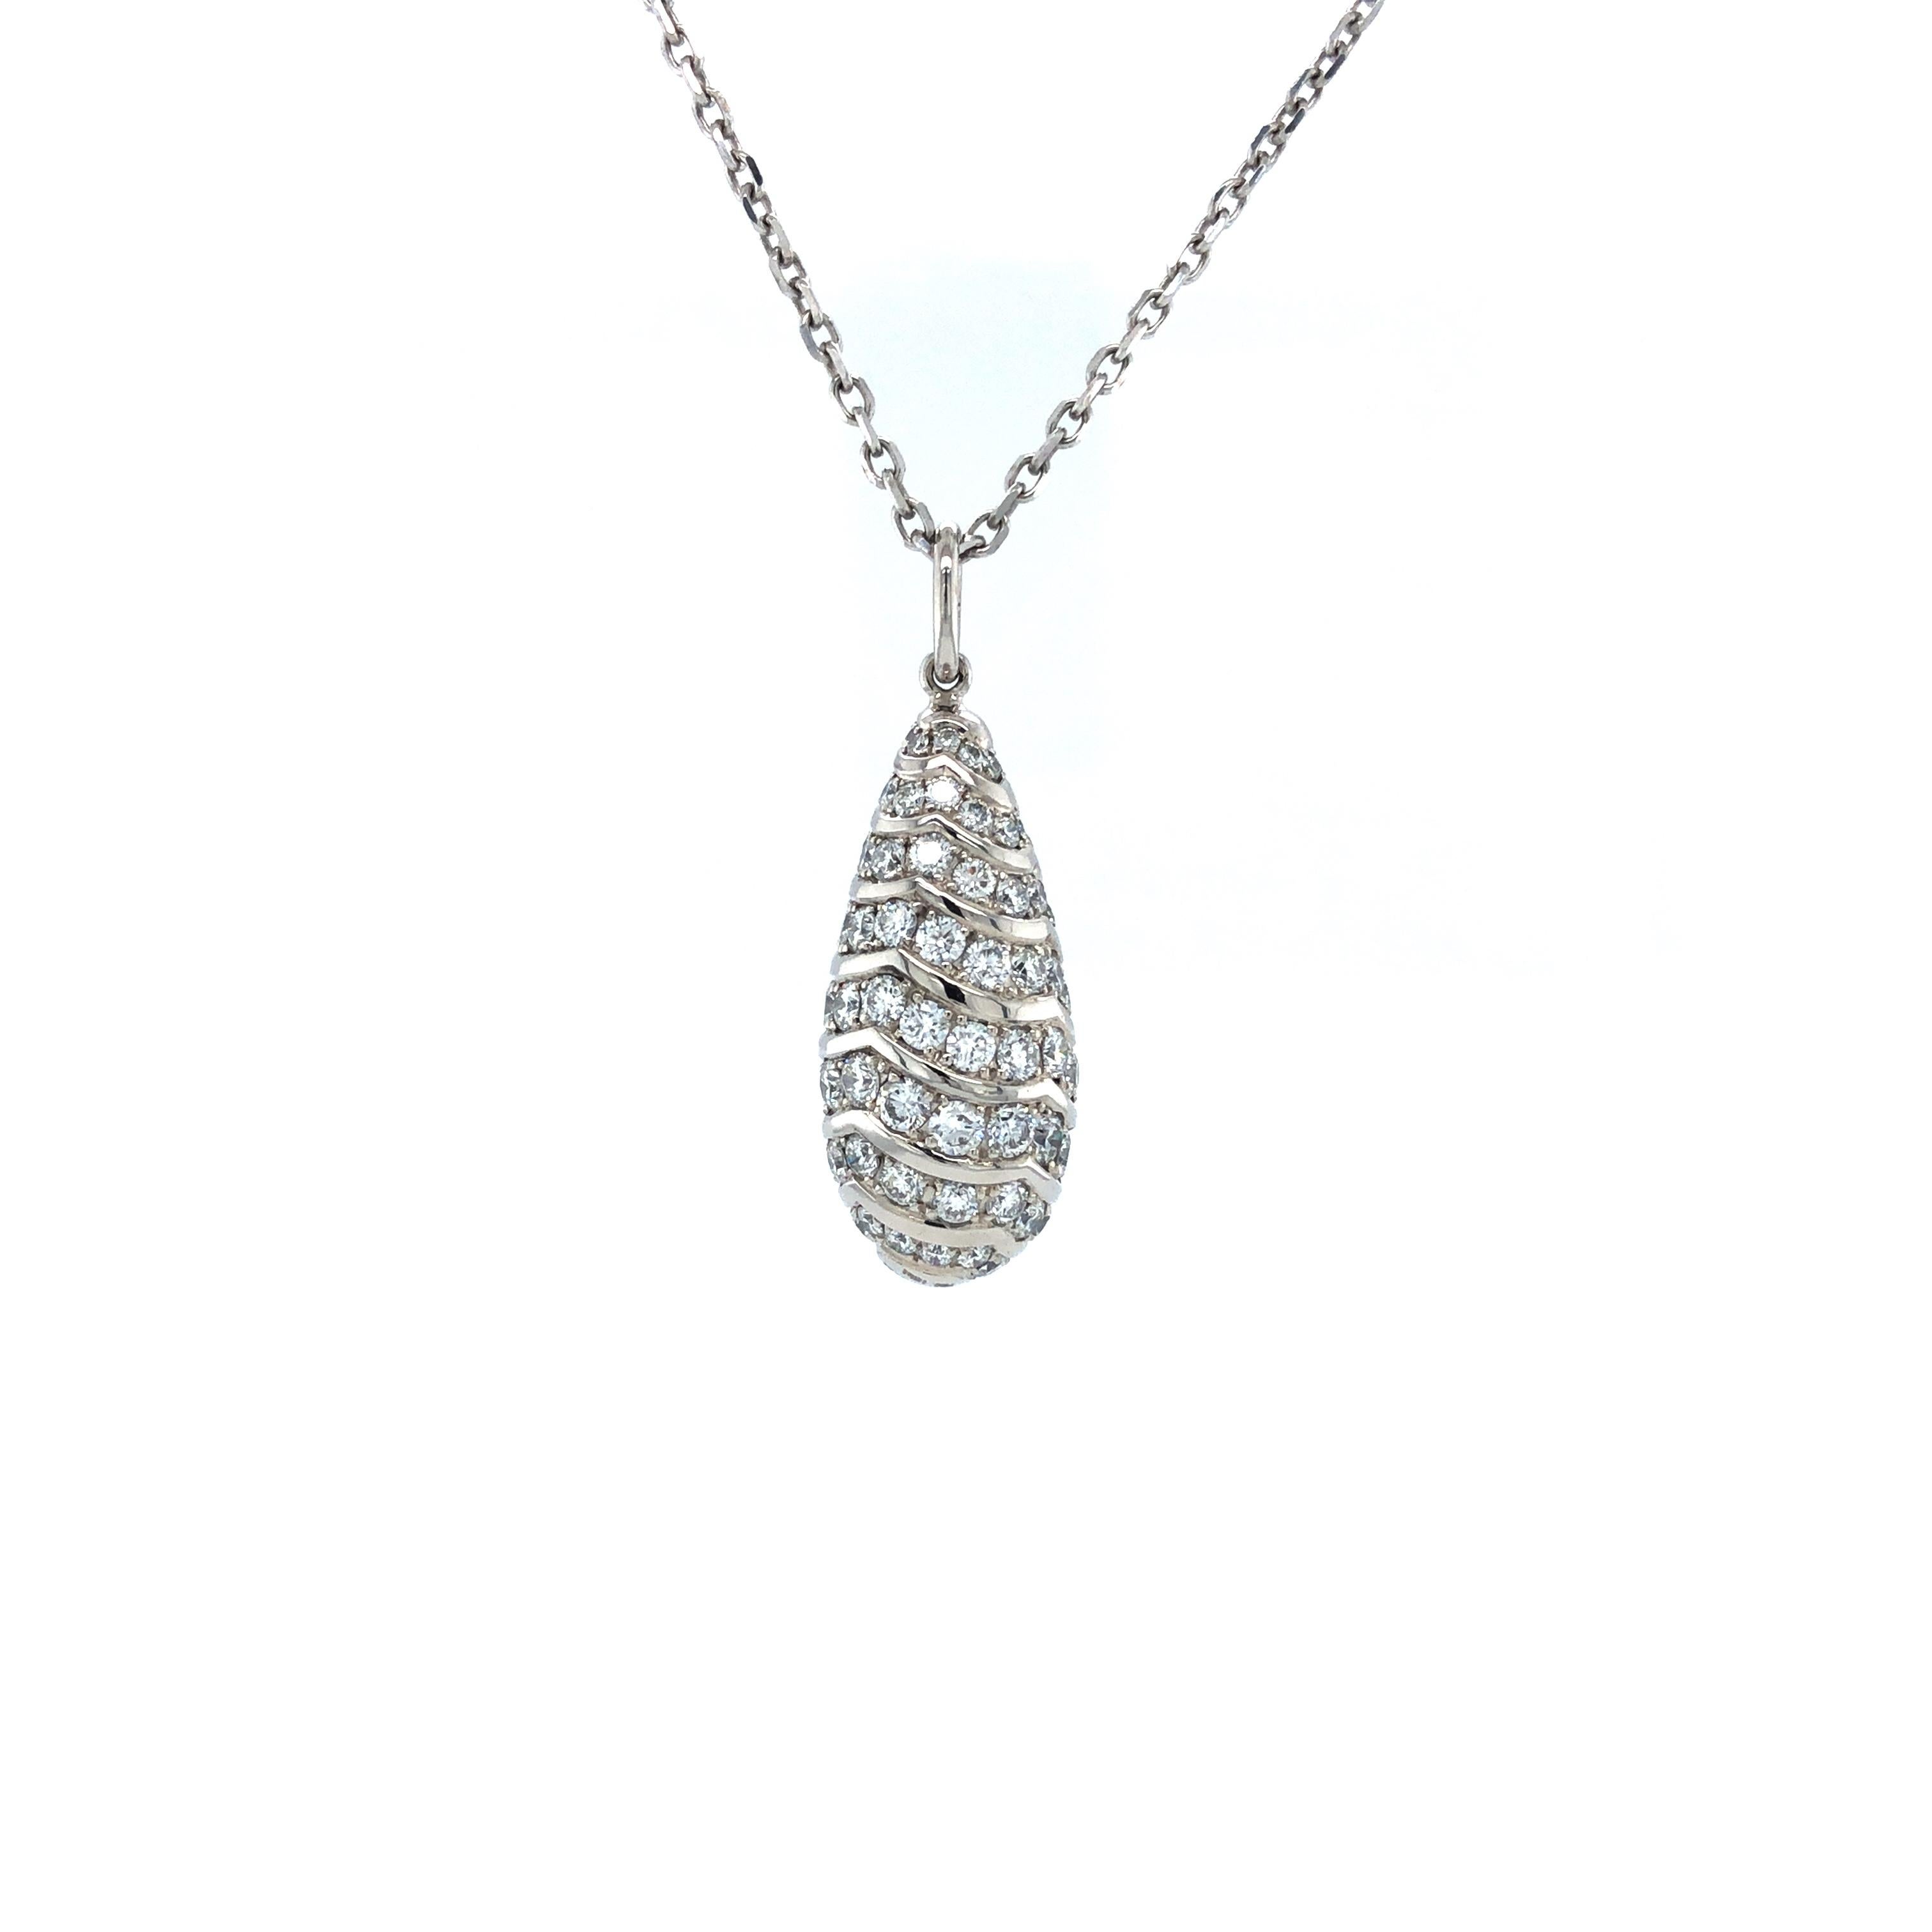 Victor Mayer drop pendant 18k white gold, Dew Drop Collection, 91 diamonds, total 1.51 ct, G VS, measurements app. 9.5 mm x 28.5 mm, limited edition of 150 pieces. 

About the creator Victor Mayer
Victor Mayer is internationally renowned for elegant